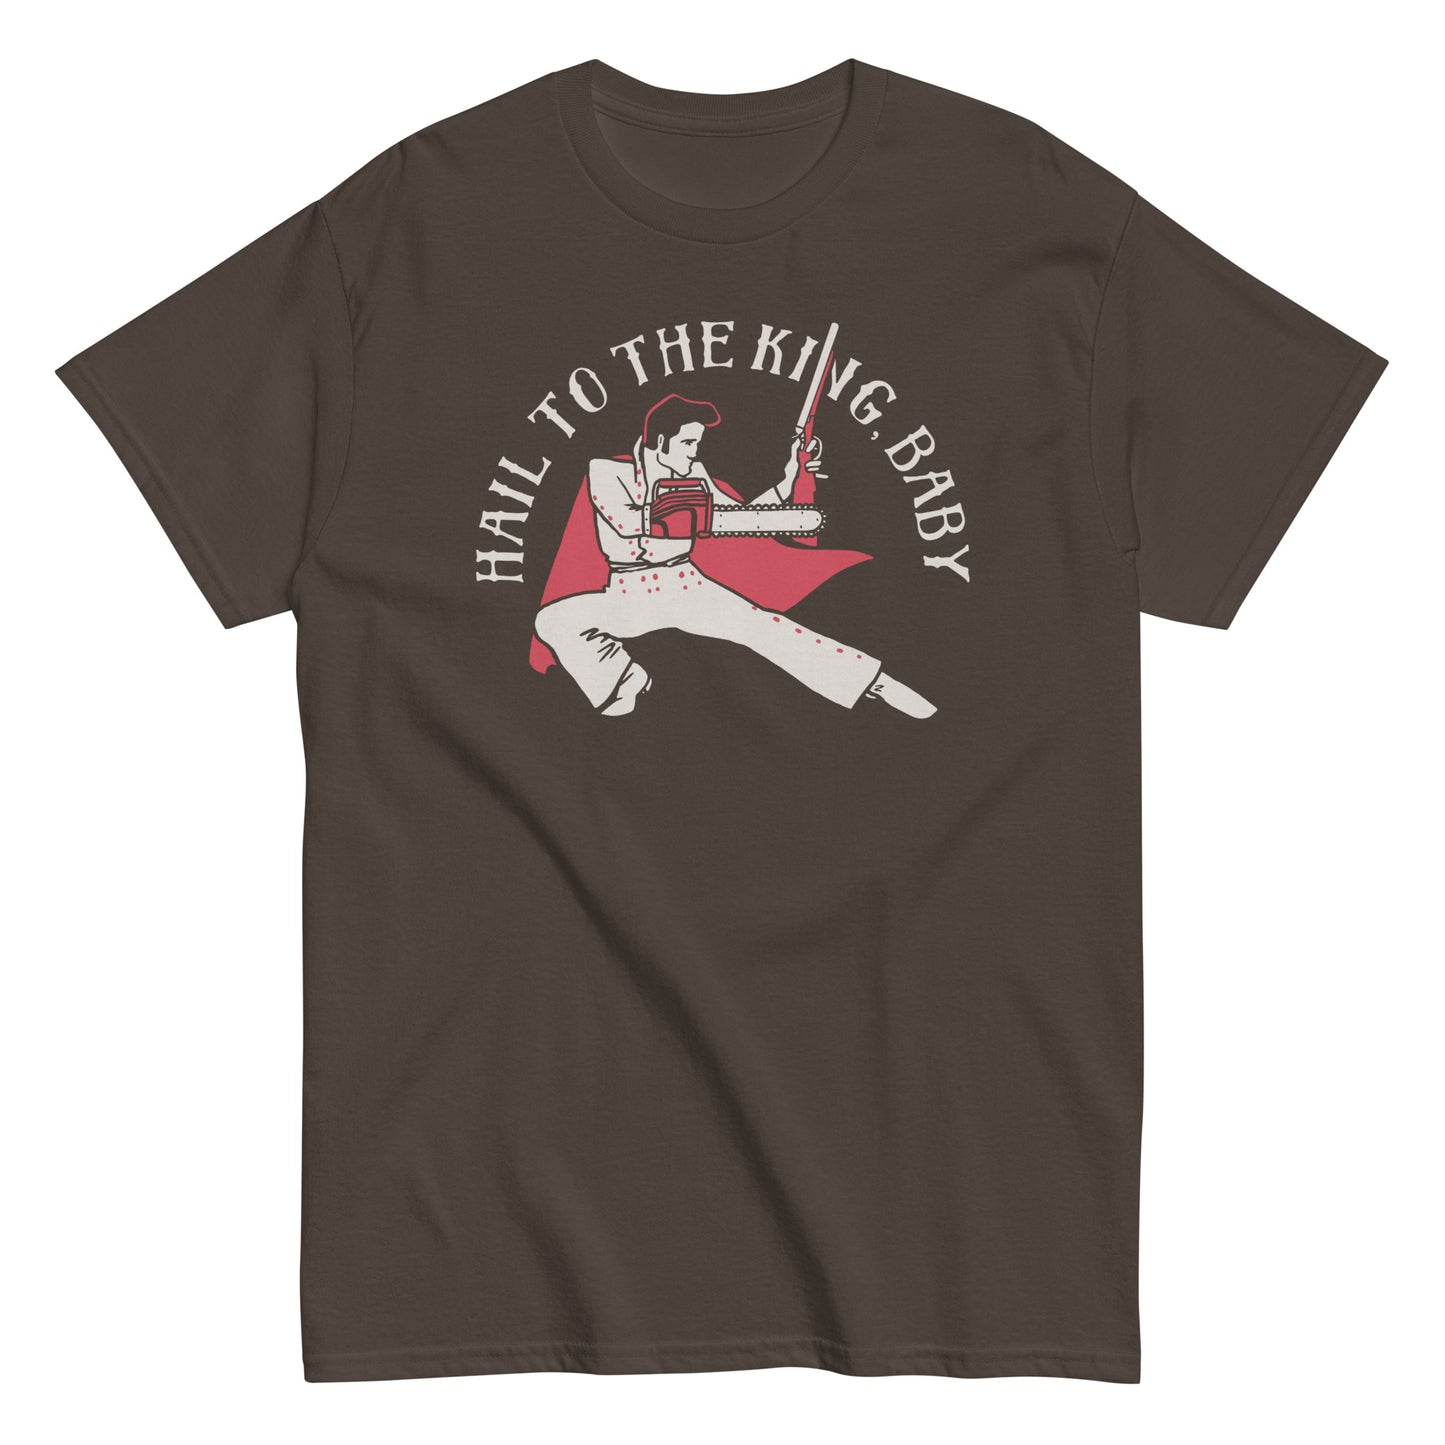 Hail To The King, Baby Men's Classic Tee